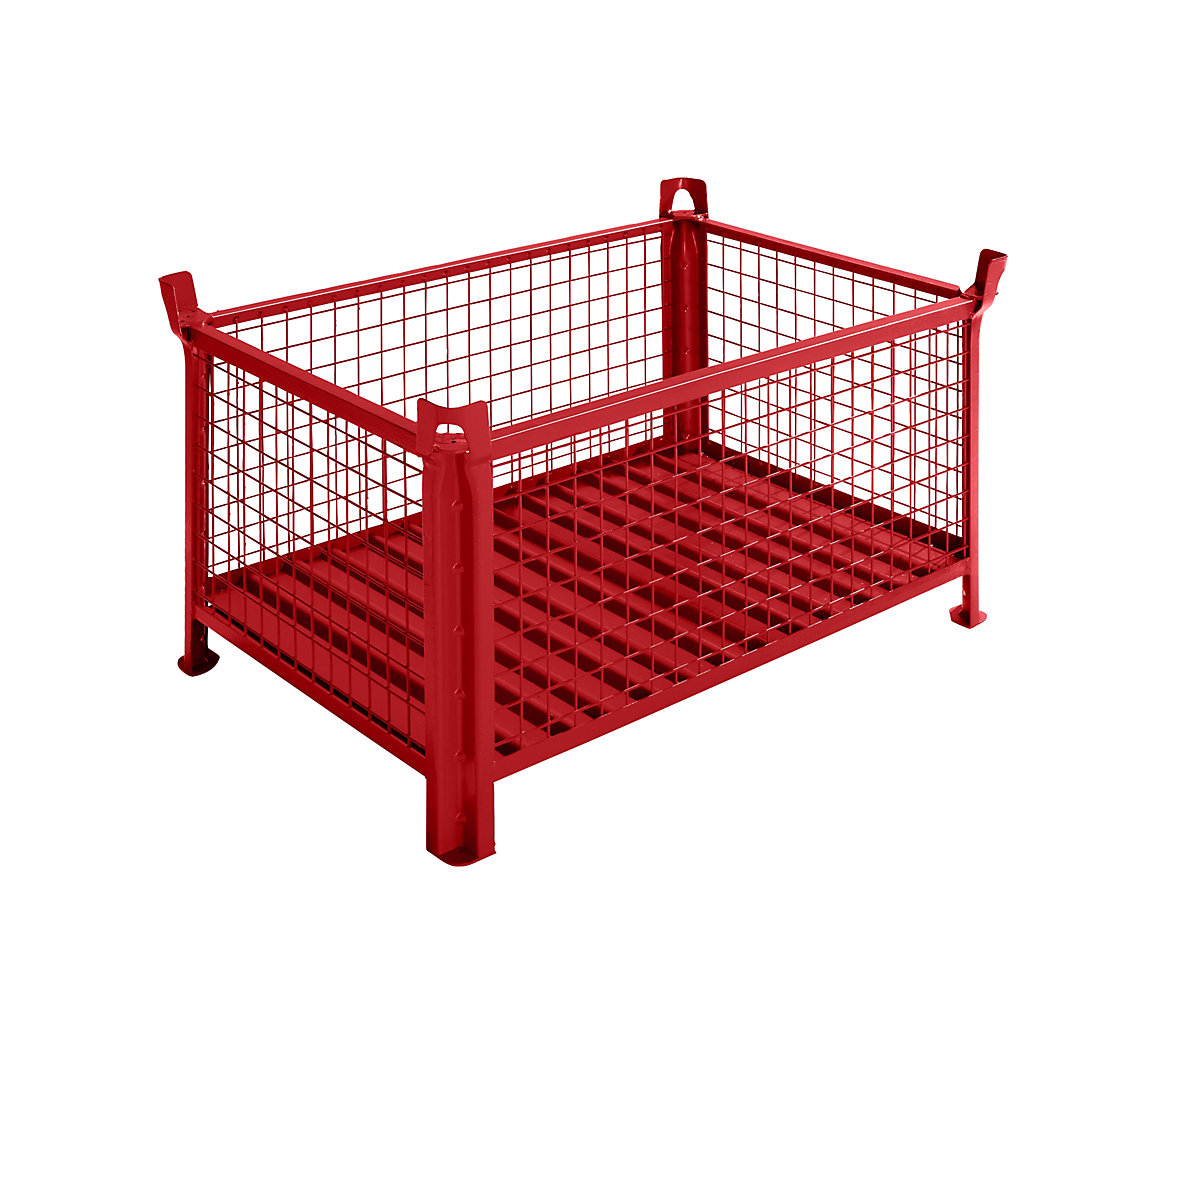 Box pallet with sheet steel base – Heson, LxW 1000 x 800 mm, painted red, 10+ items-6